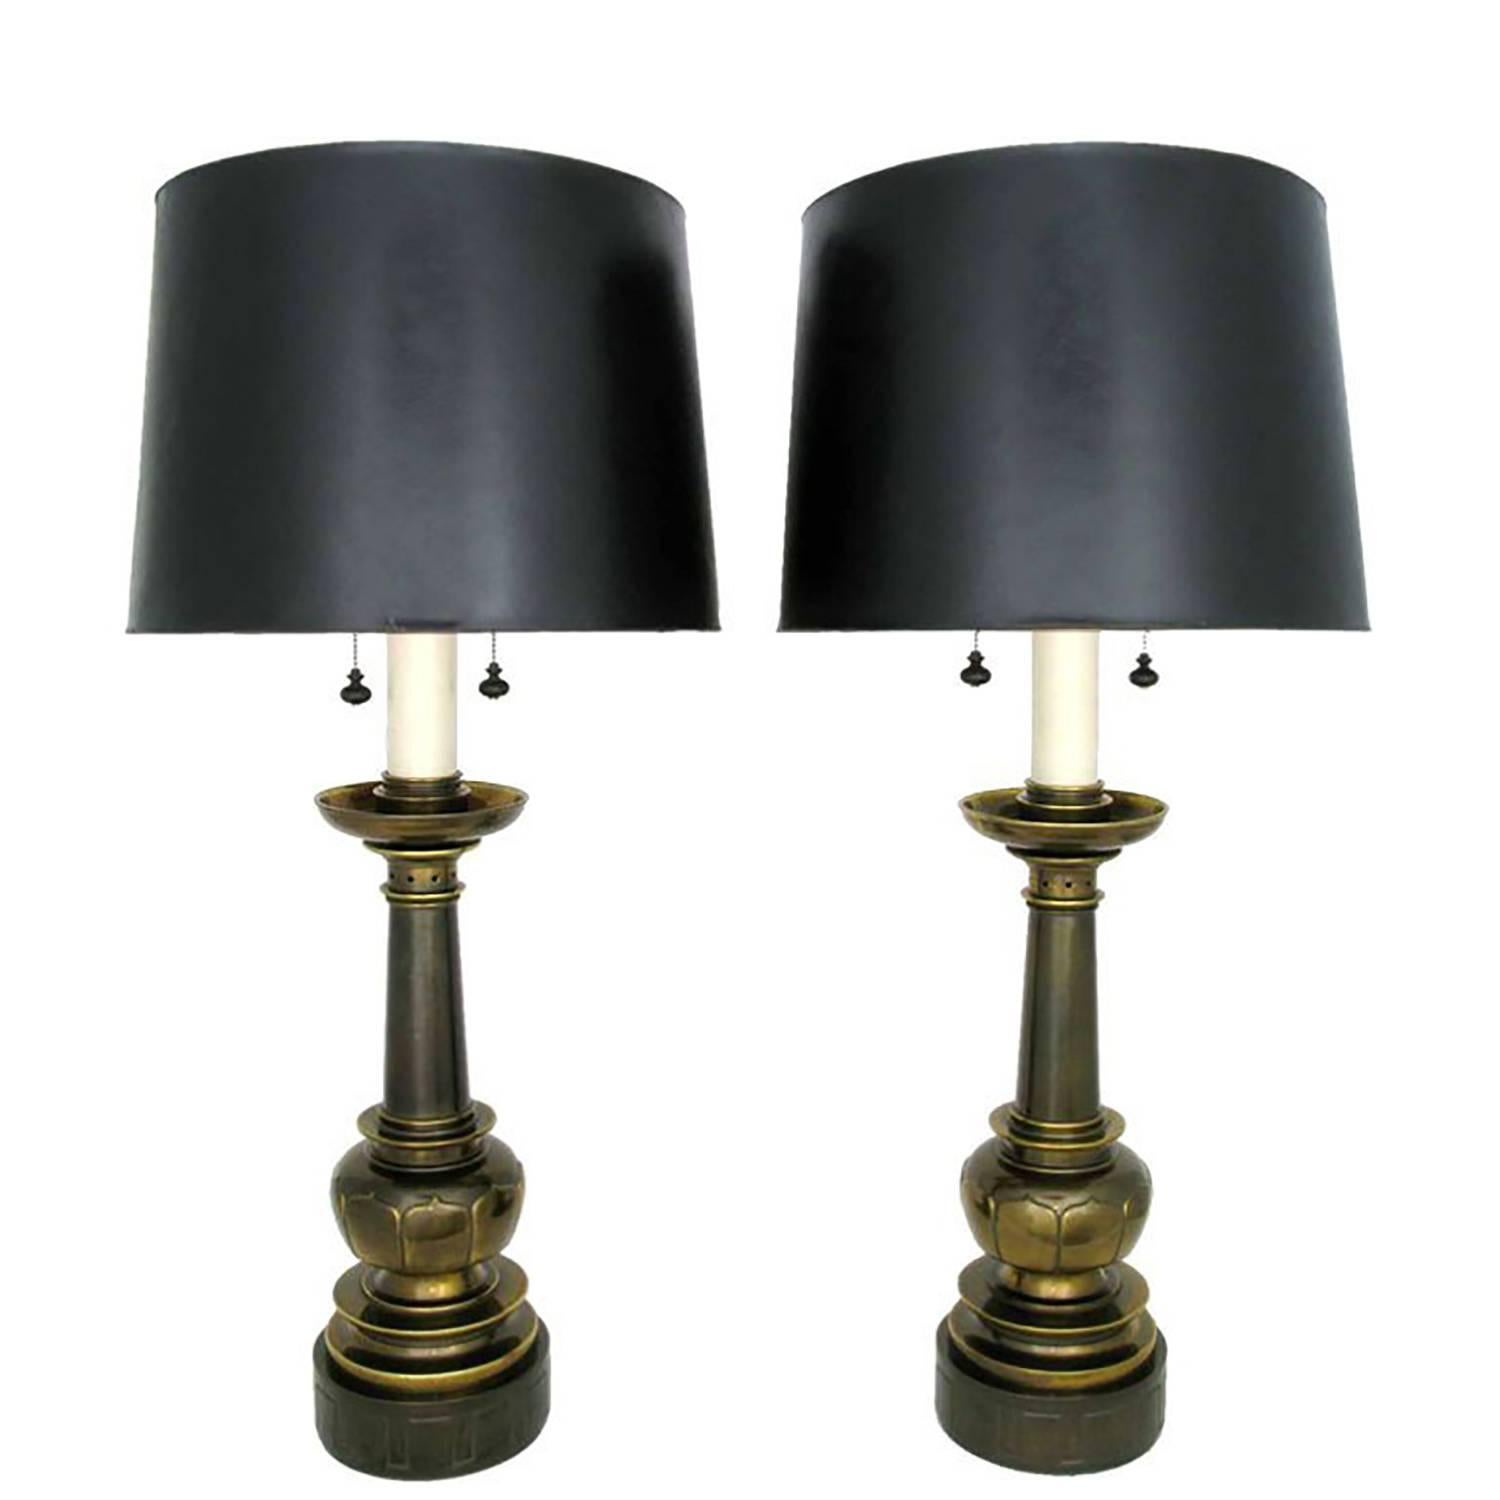 Impressive Pair of Neoclassical Brass Table Lamps by Stiffel For Sale